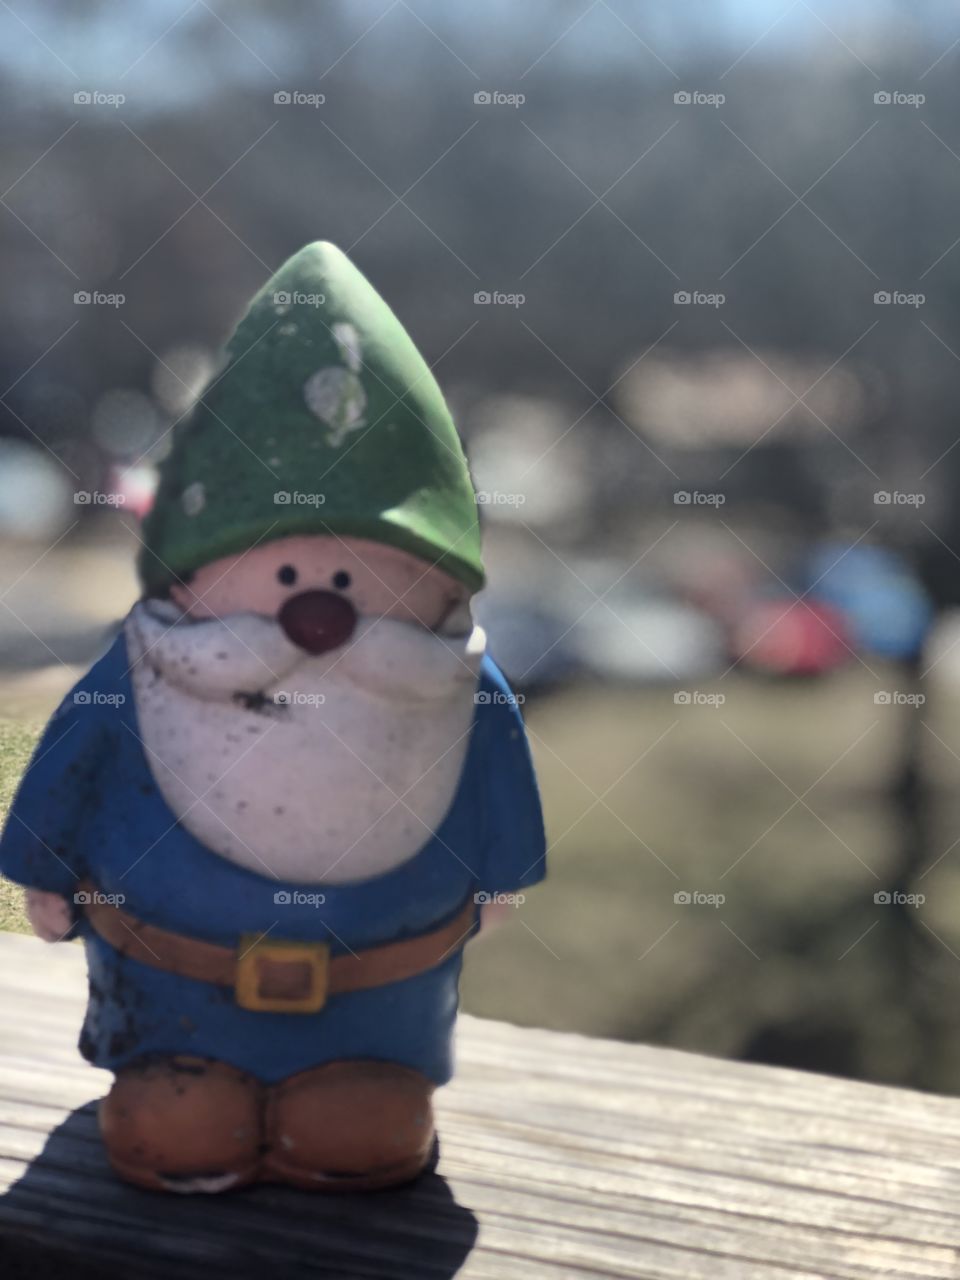 Gnome knows it’s almost spring 